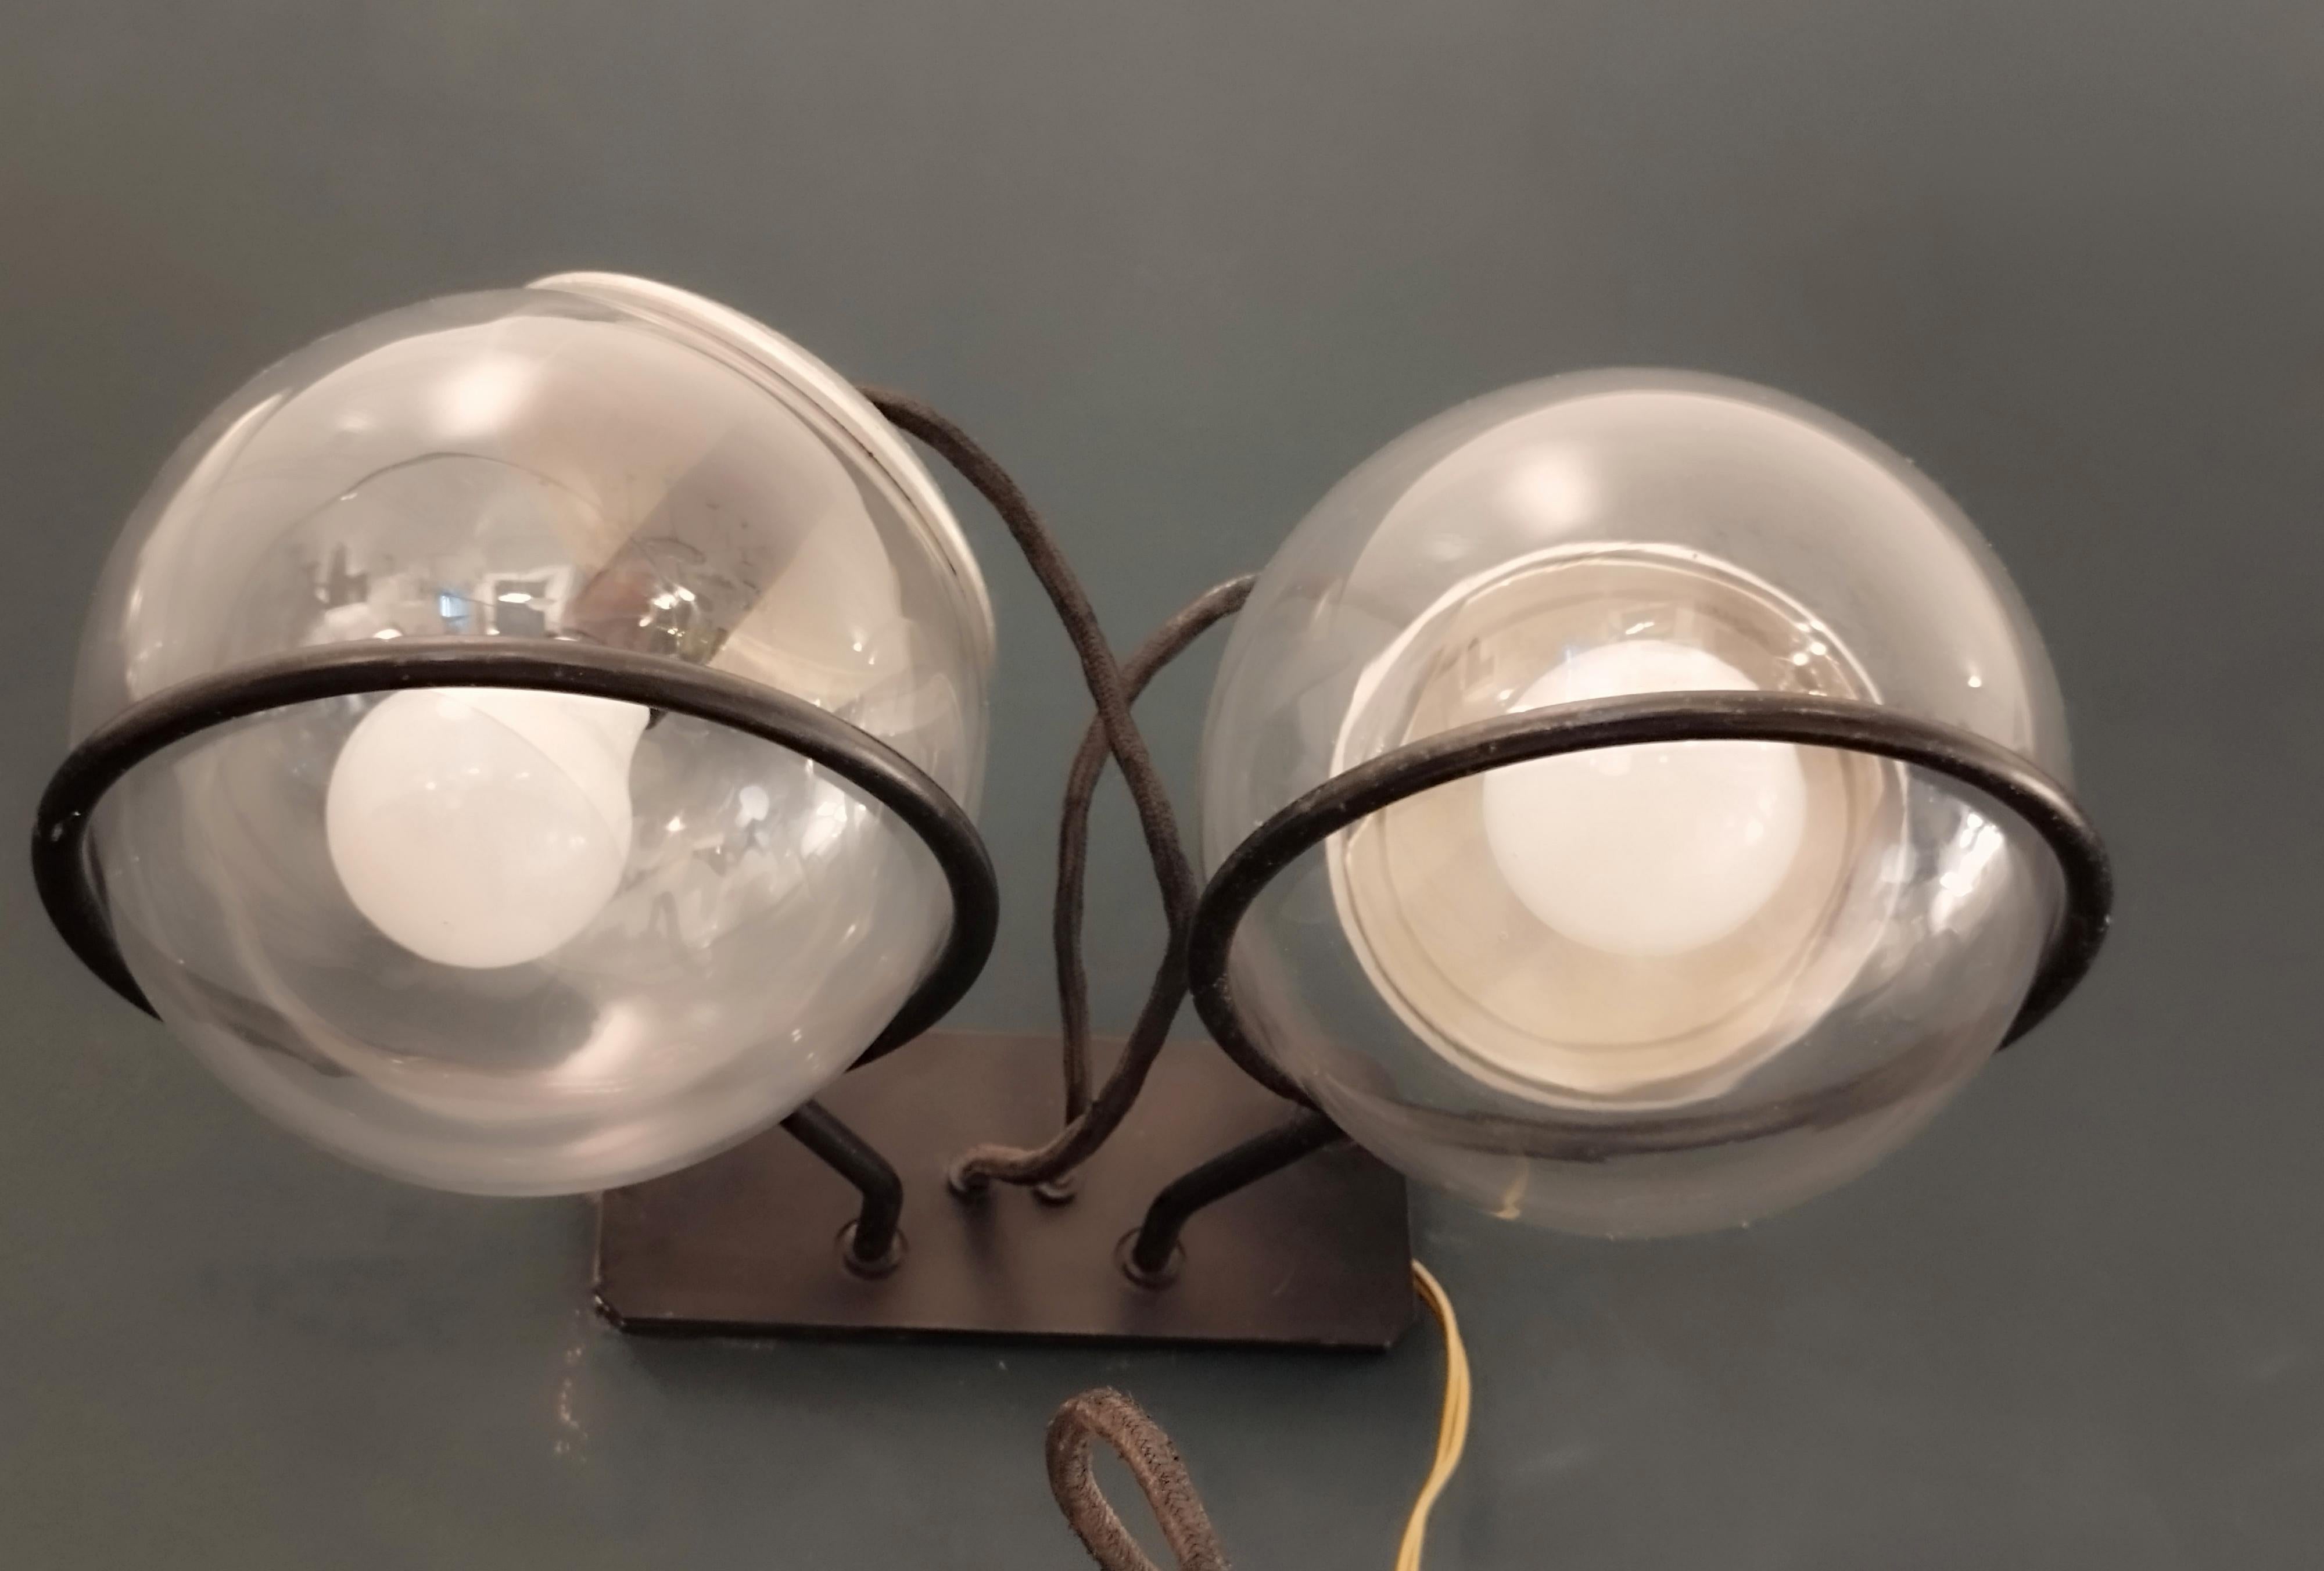 Rare and Original two pair of vintage wall sconces, model 238/2 by Gino Sarfatti for Arteluce, Milan. Italy, 1960
Two spherical diffusers with clear glass, resting on black lacquered iron bar support rings. Closed with an oxidized aluminum